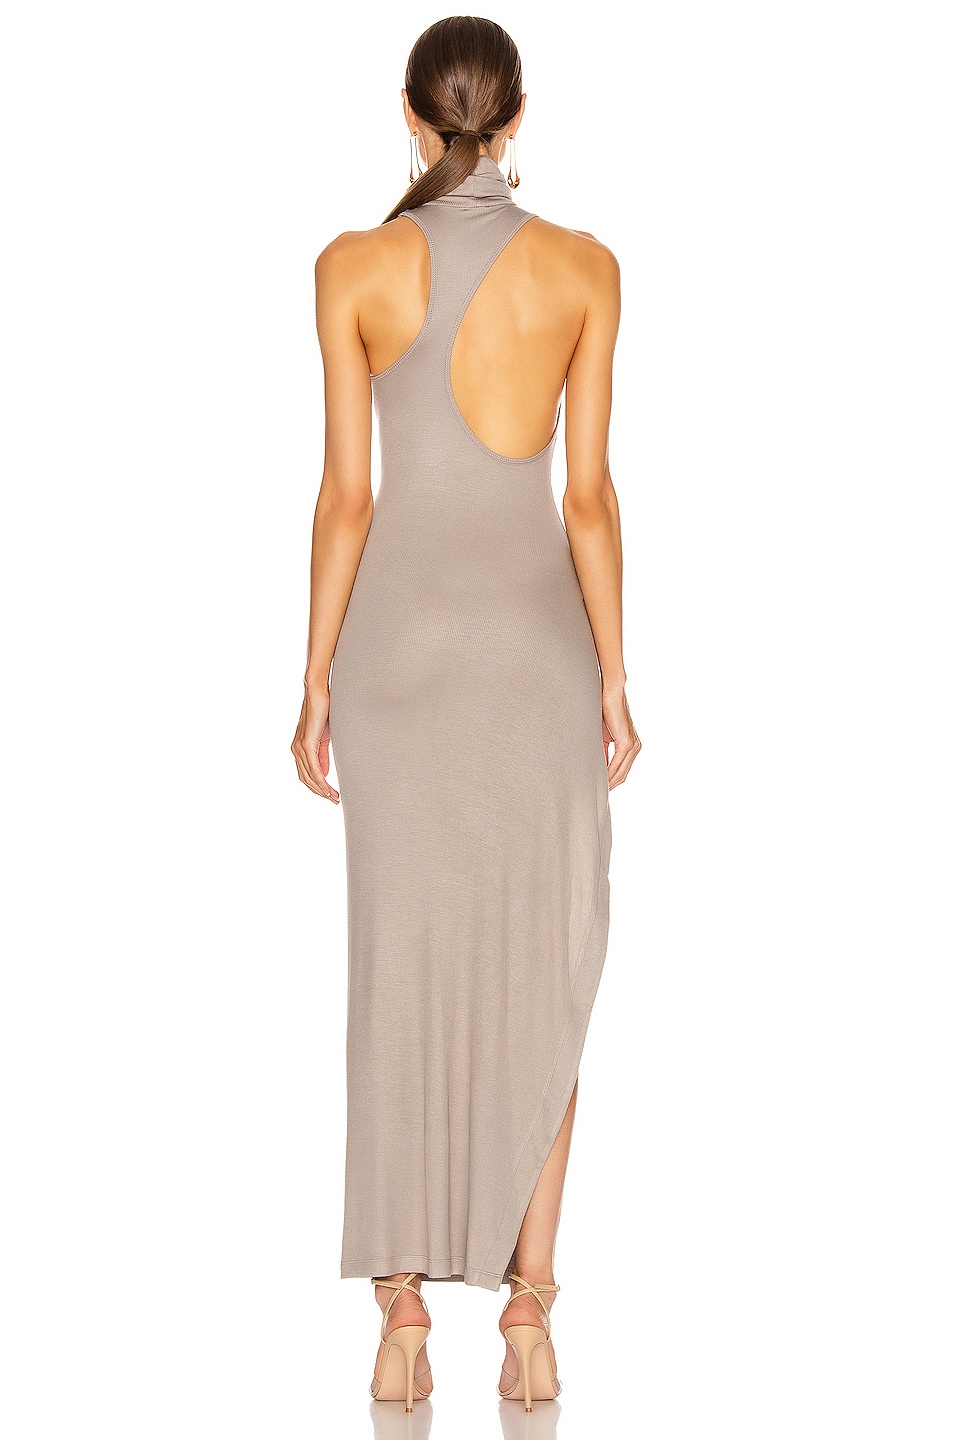 ALIX NYC Orchard Dress in Dove | FWRD